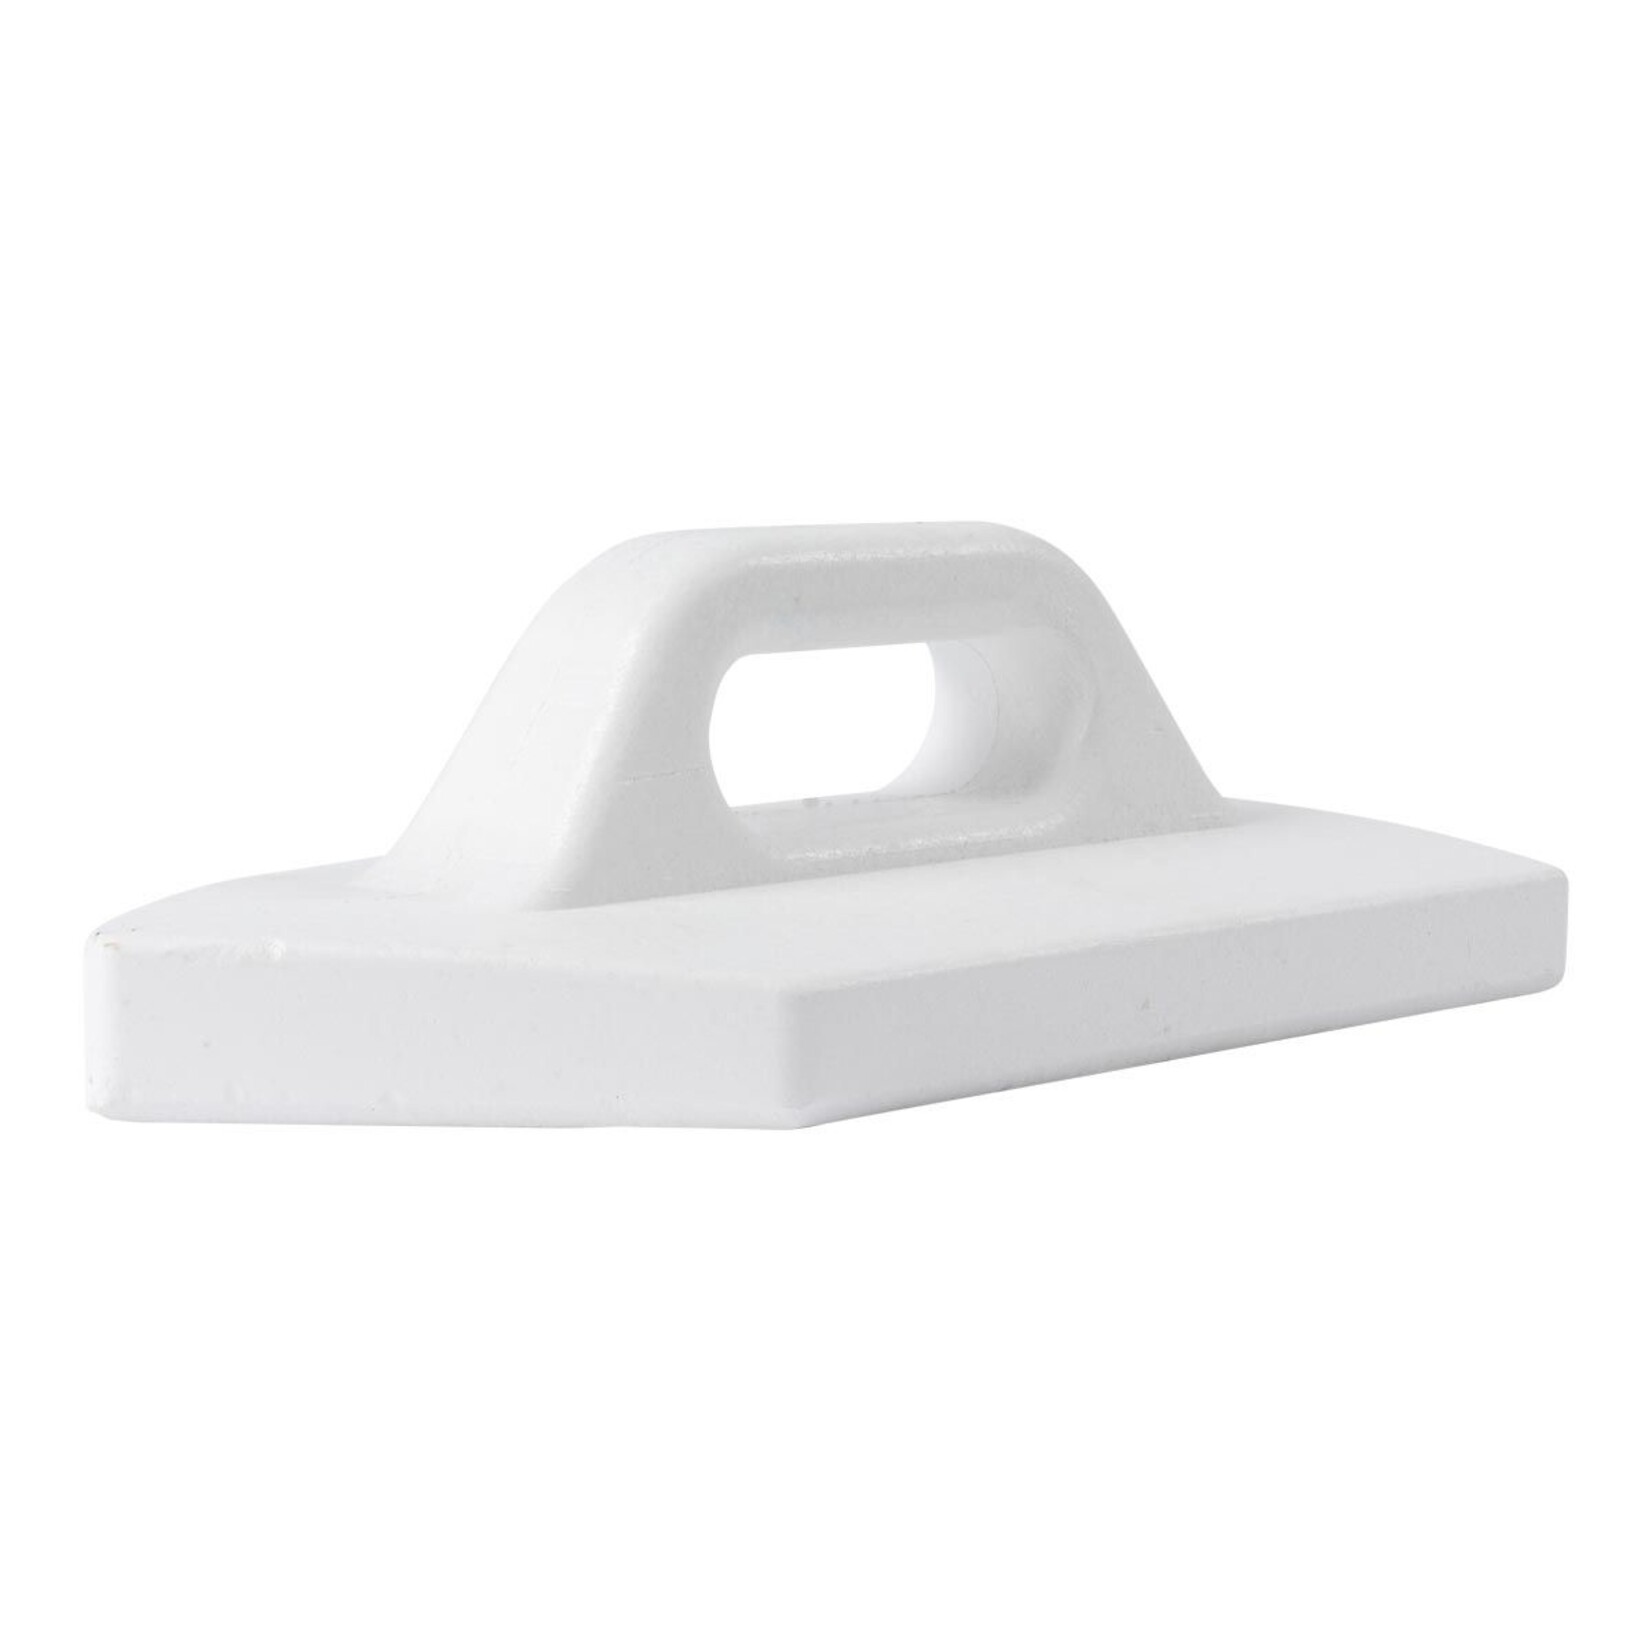 Ox Tools OX Professional Boat Shaped Polystyrene Float